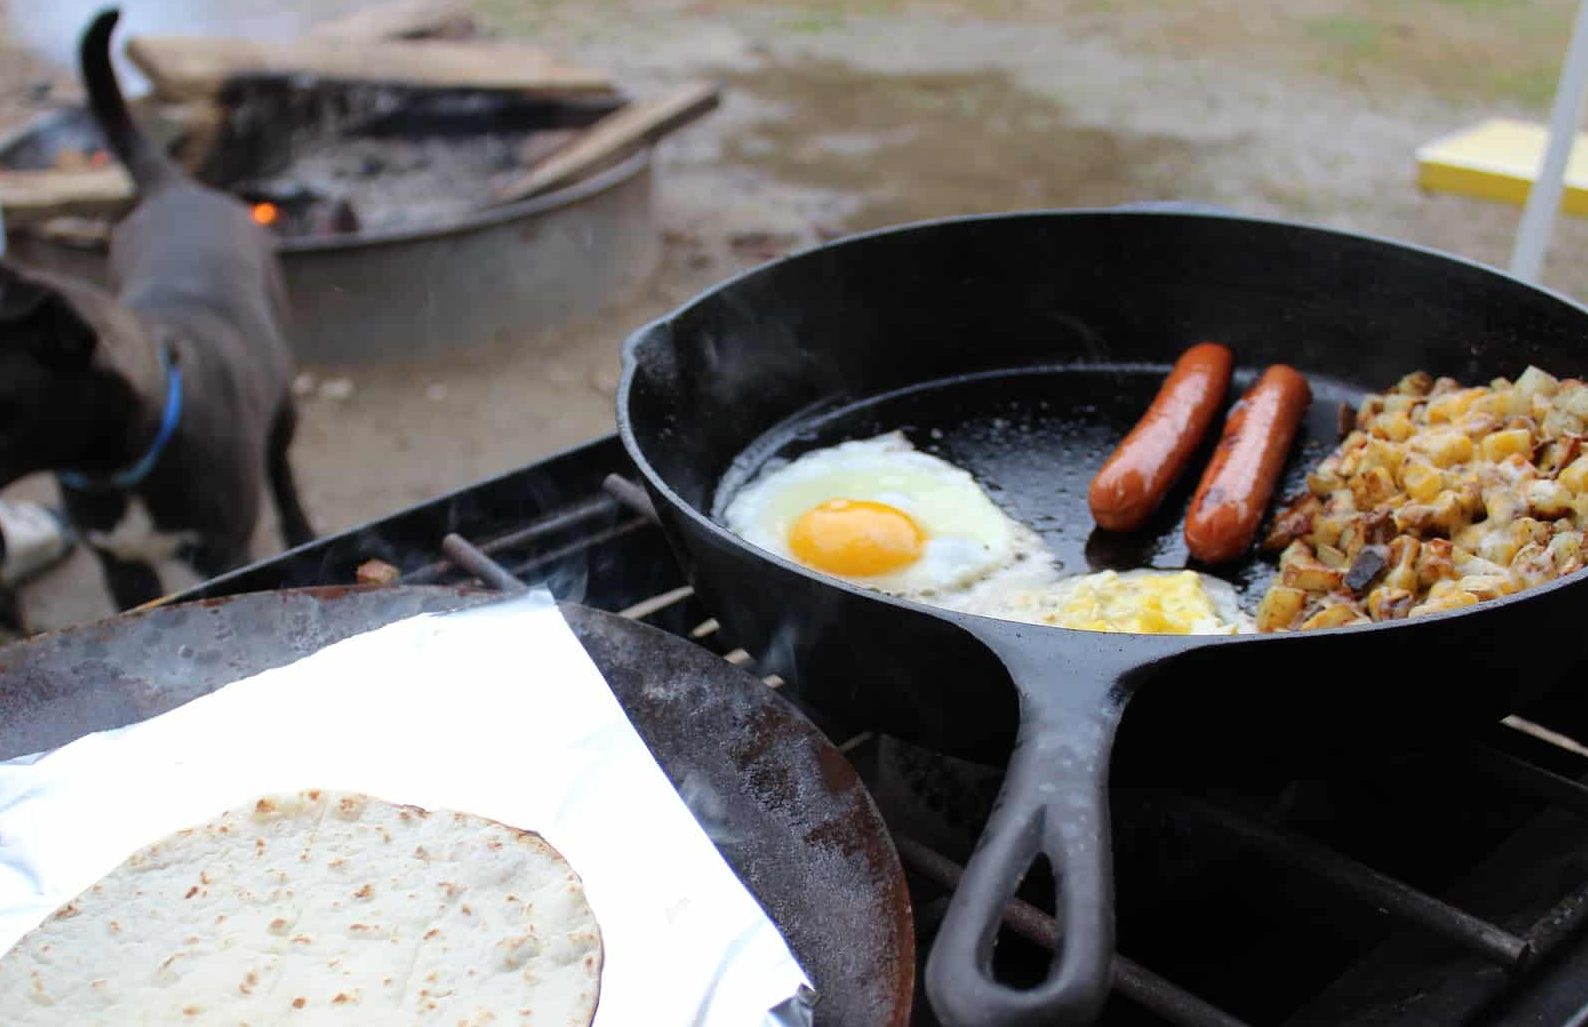 How to clean a cast iron skillet while camping